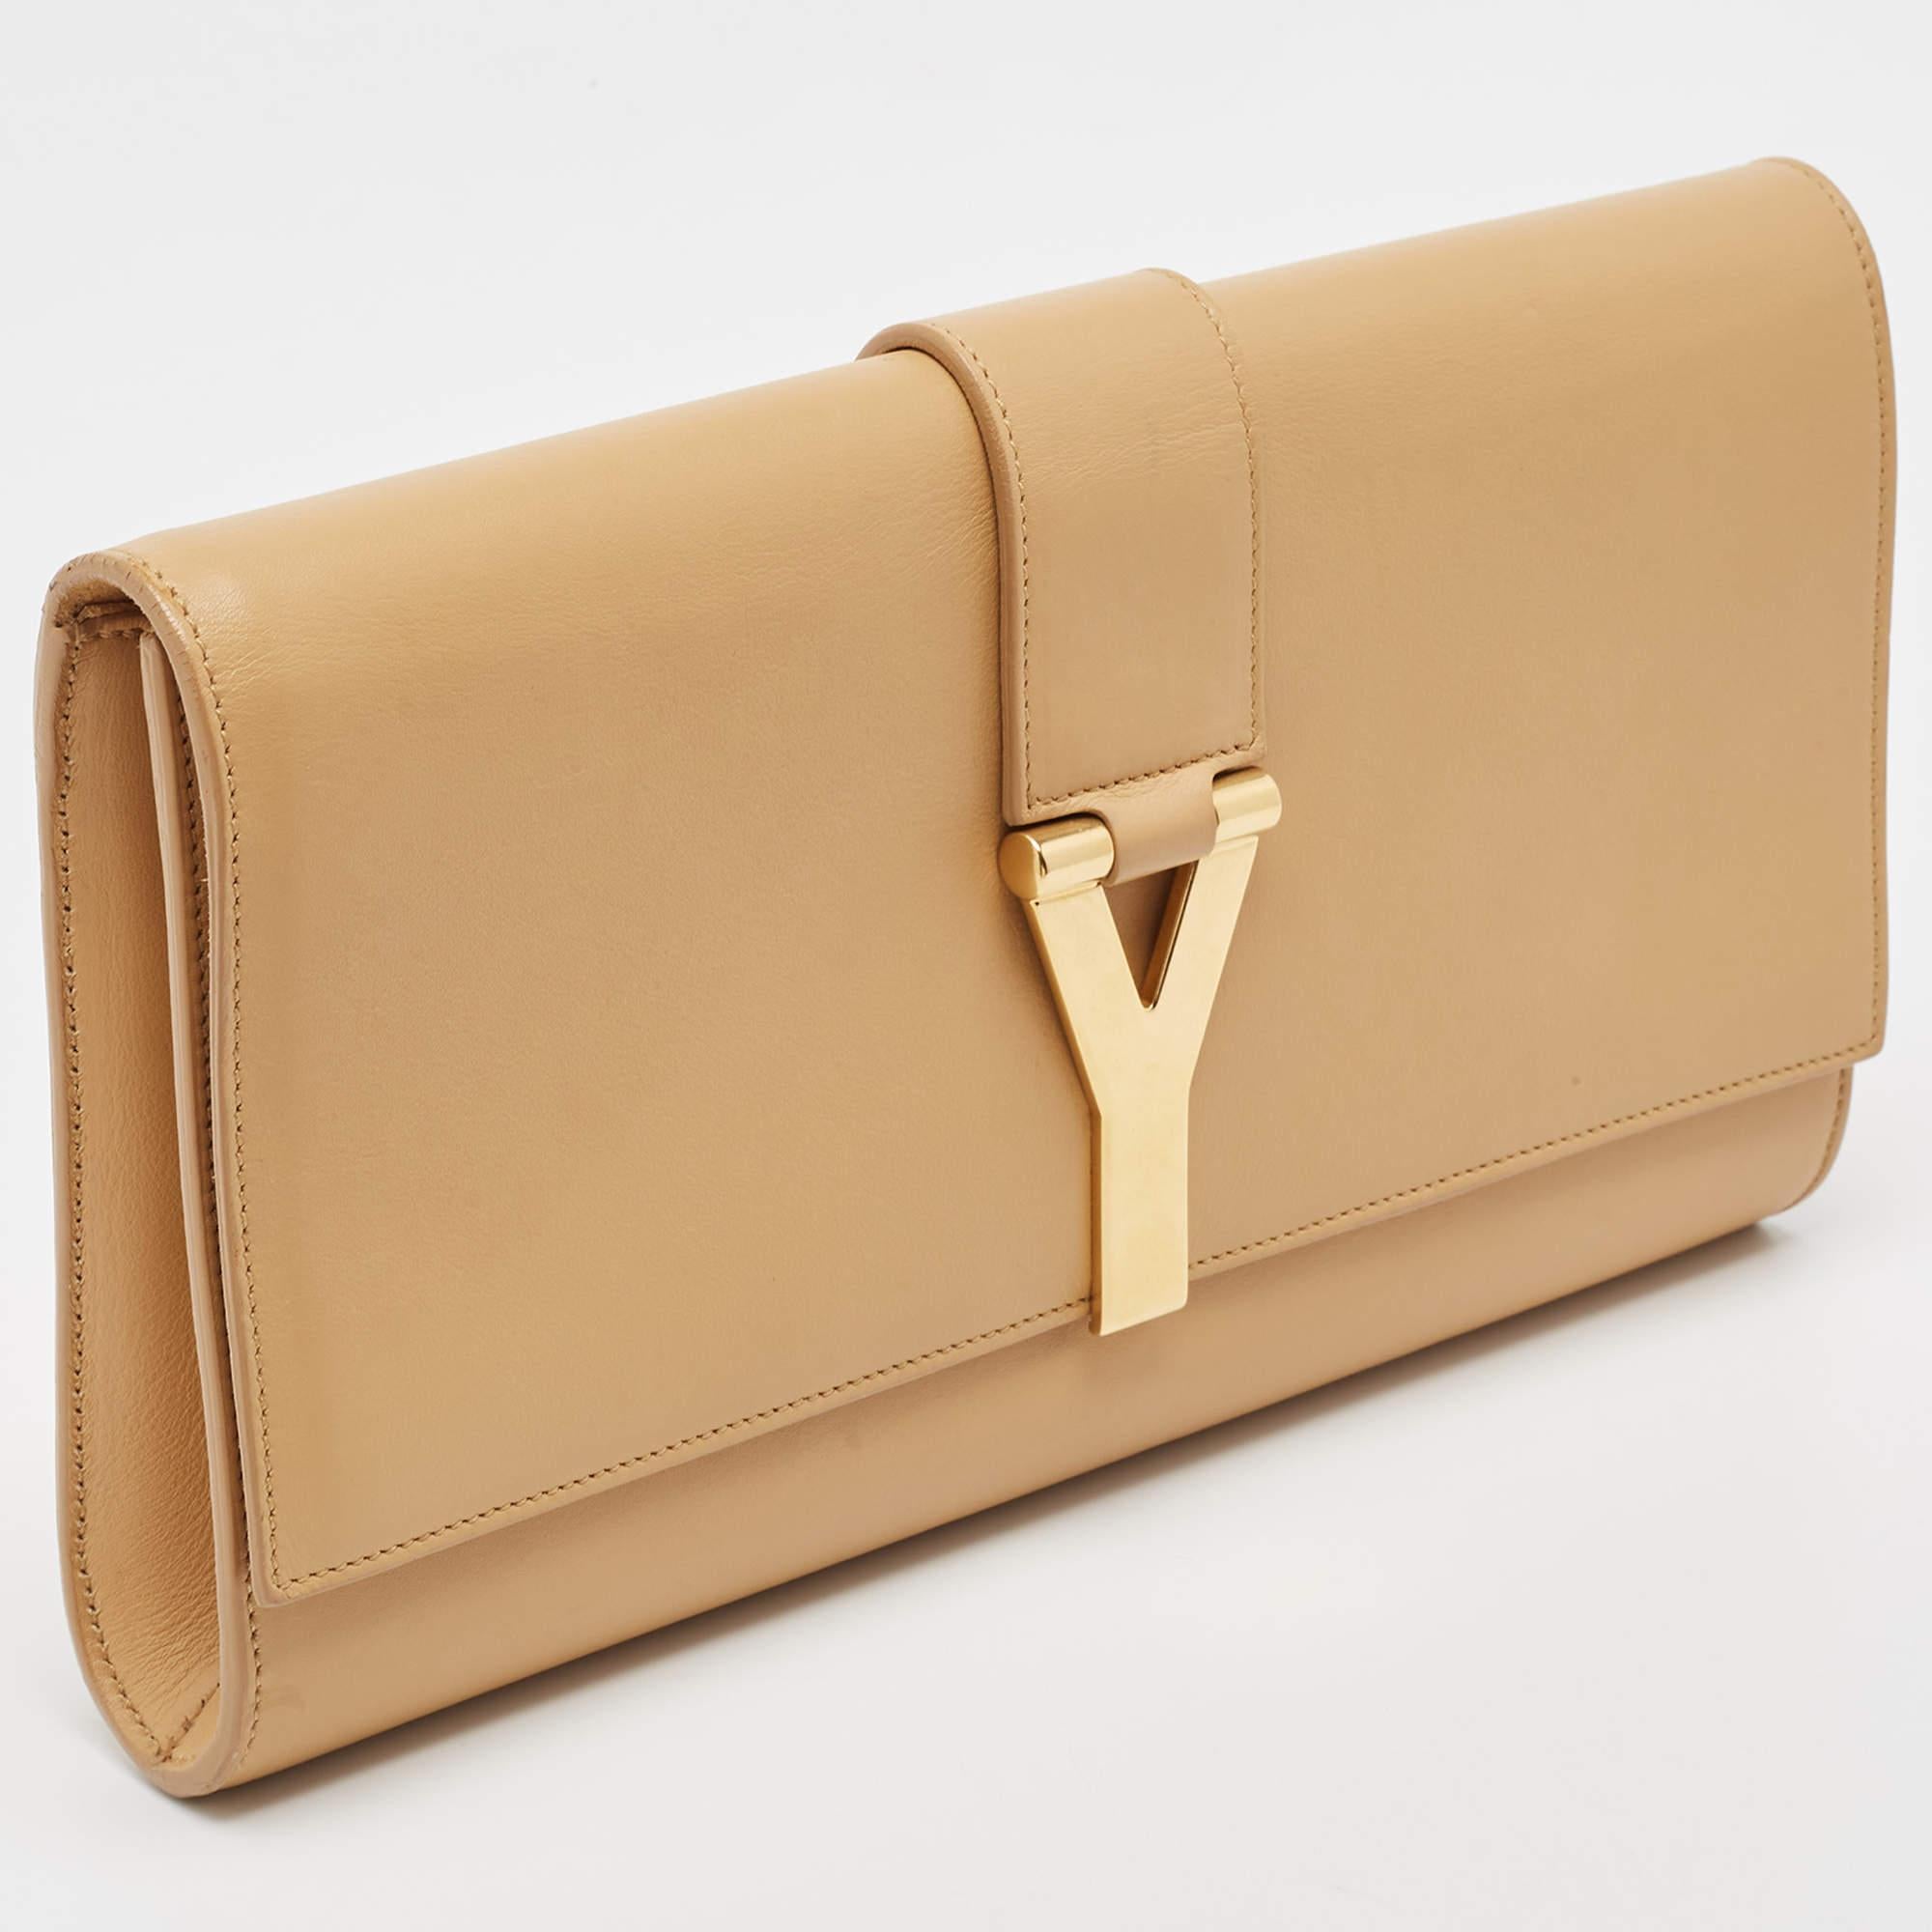 This Y-Ligne clutch from Saint Laurent Paris is one creation a fashionista like you must own. It has been wonderfully crafted from leather and it flaunts a beige shade. It also comes equipped with a front flap that opens to reveal a suede-lined